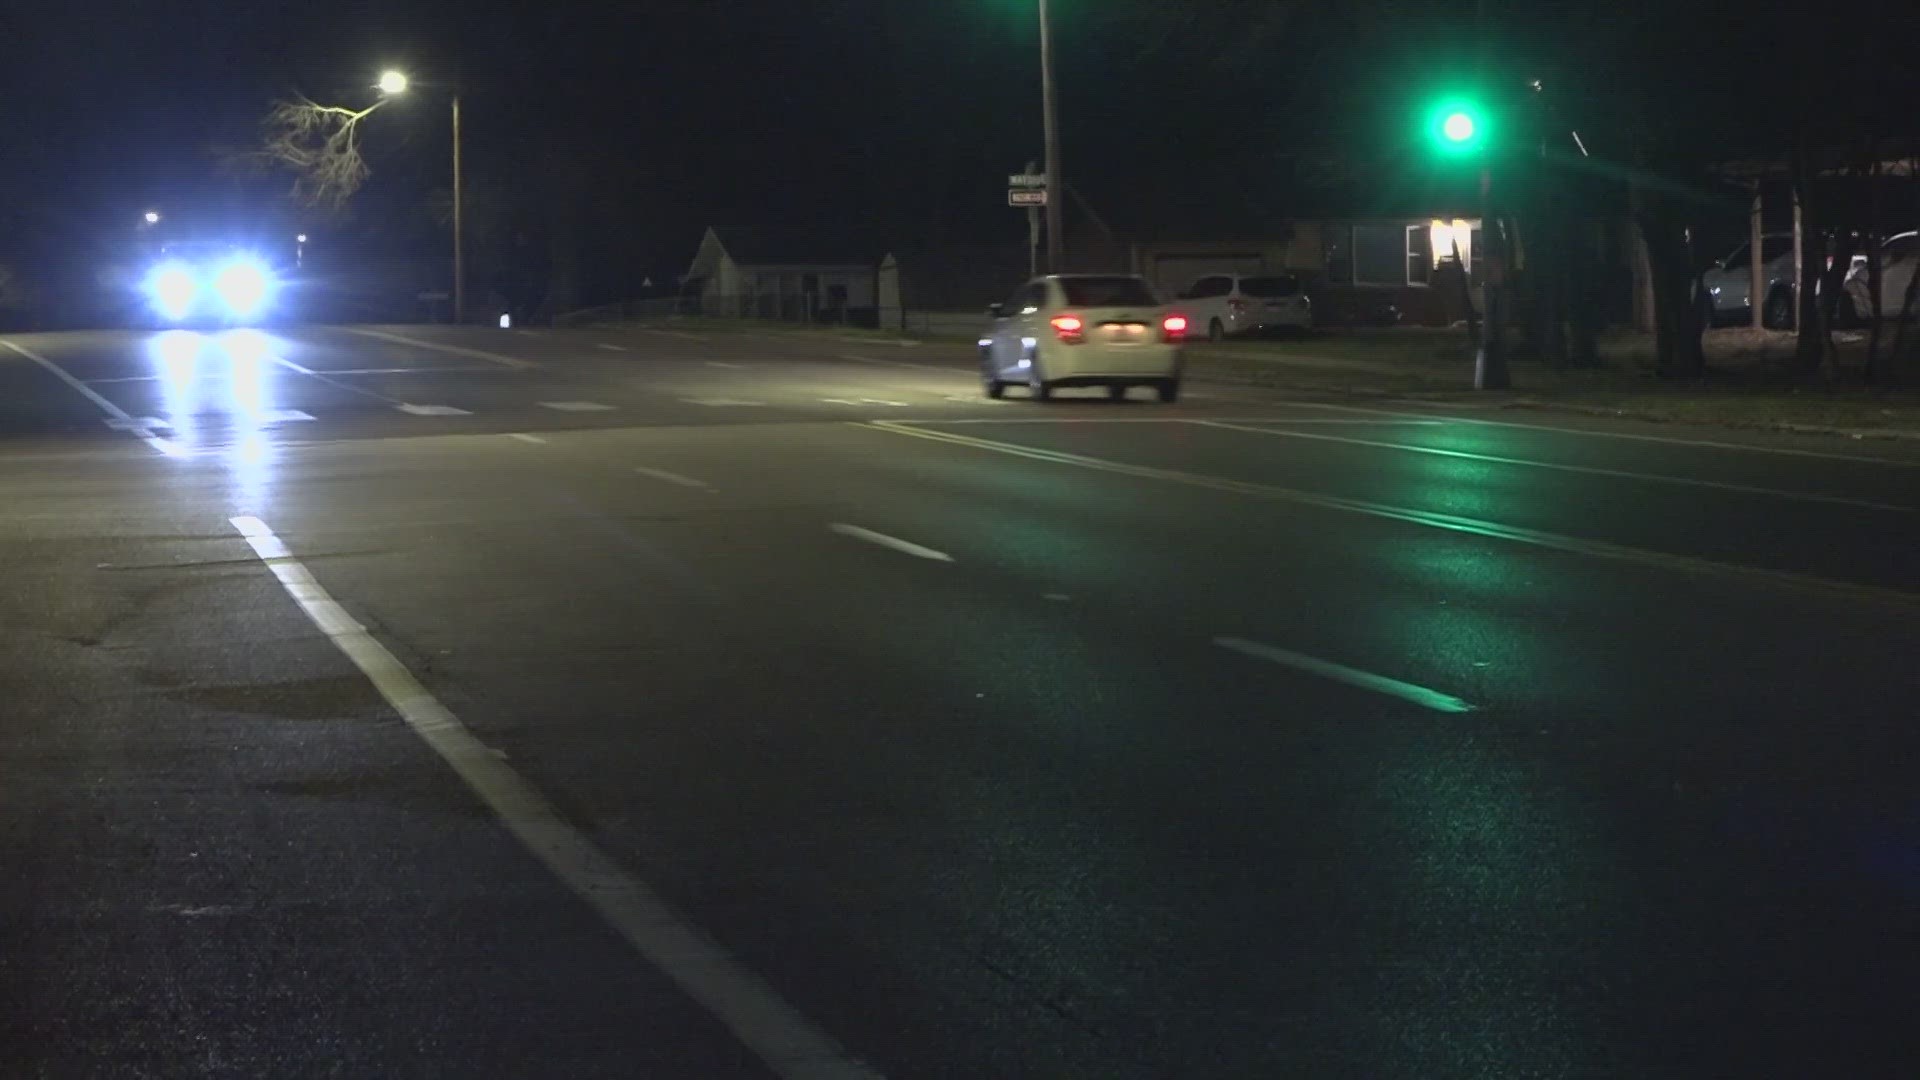 The crash happened Monday night at the intersection of Chambers Road and Joyce Ellen Lane. There, police said a white Ford van struck a pedestrian and drove off.